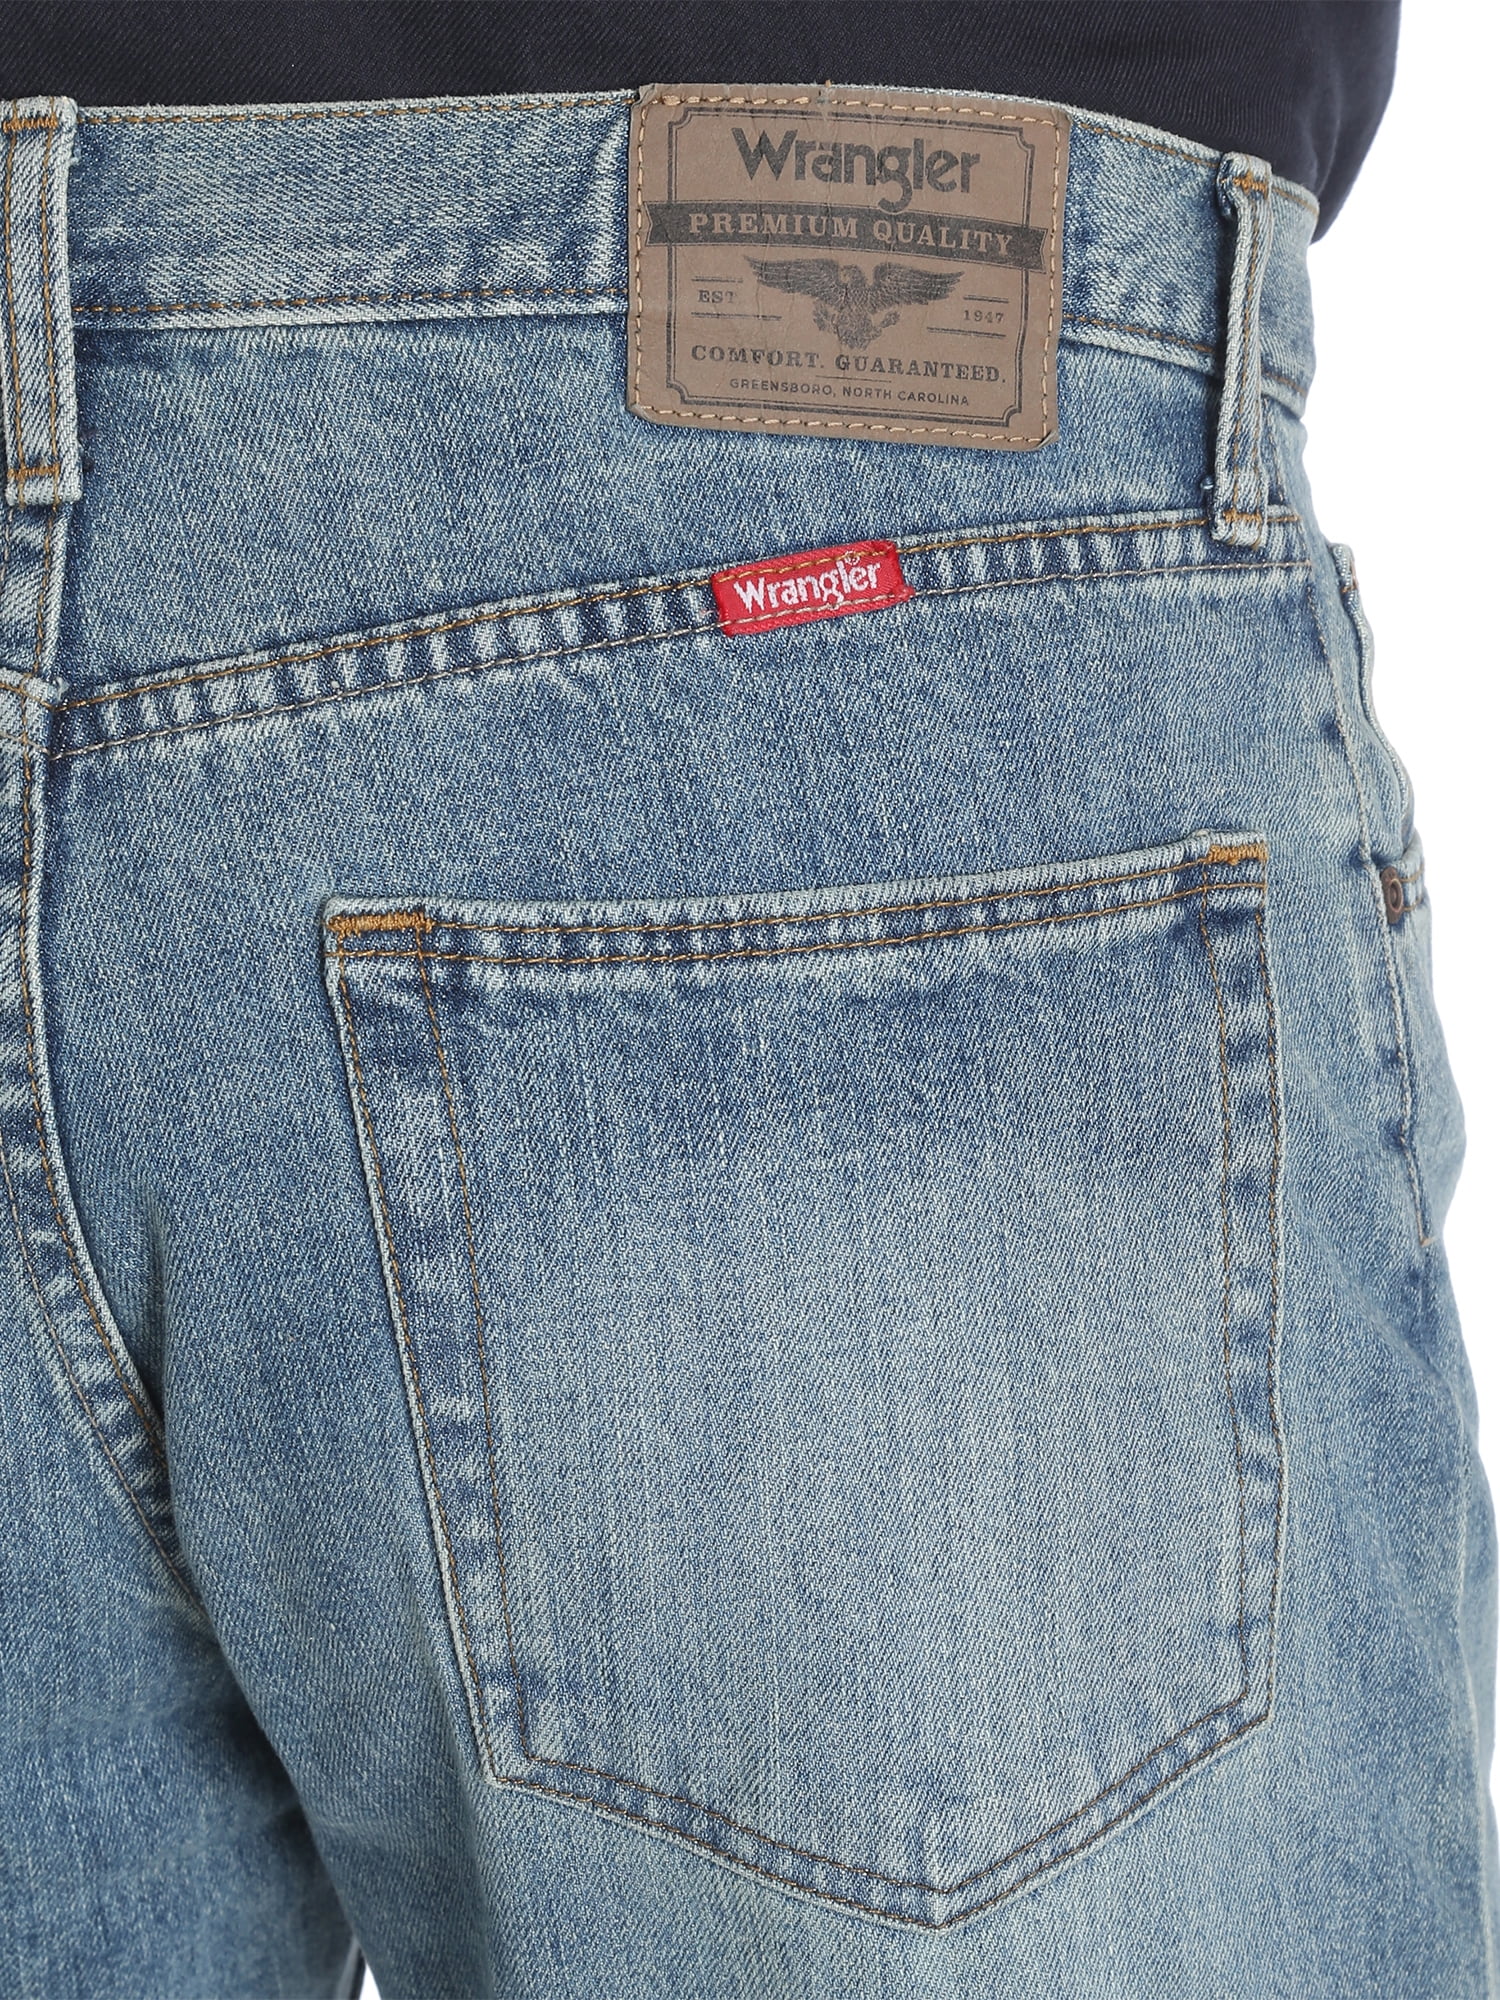 wrangler relaxed fit jeans 44x32